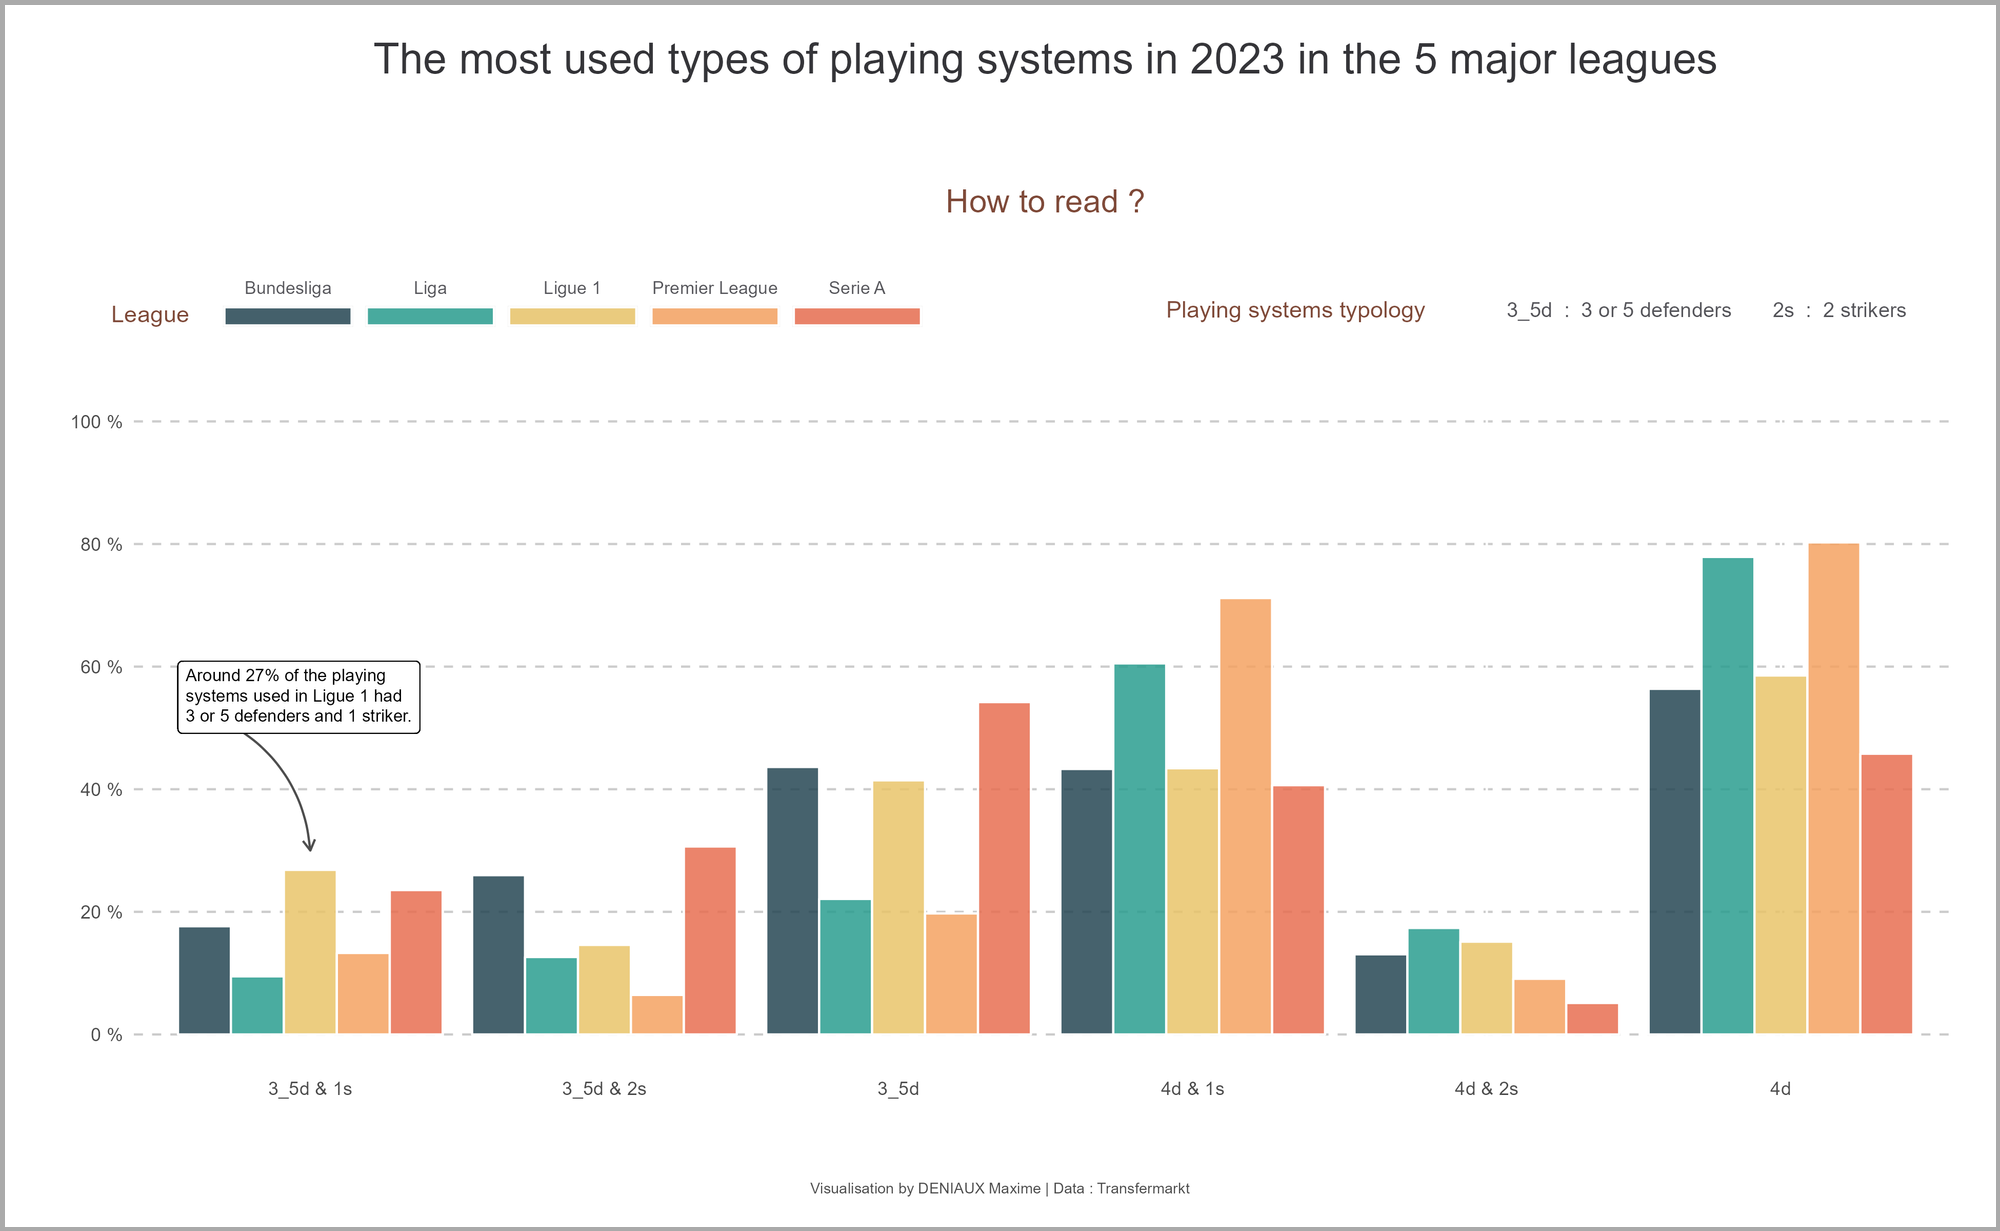 The most used types of playing systems in the 5 major leagues (2023)